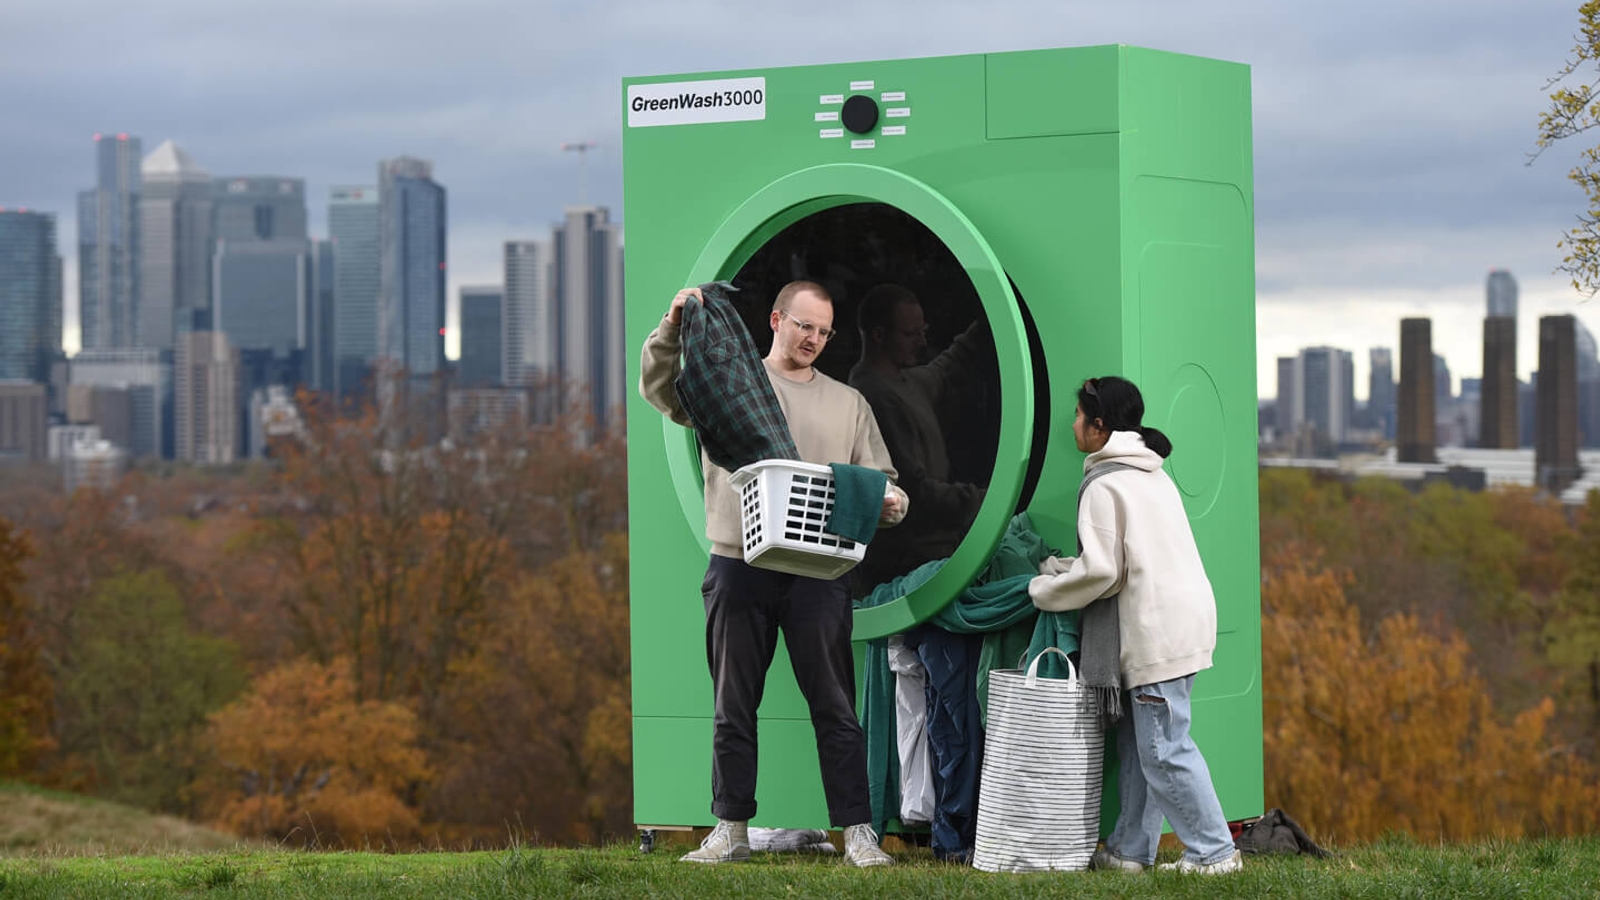 A man taking clothes out of a washing basket in front of a big green washing machine